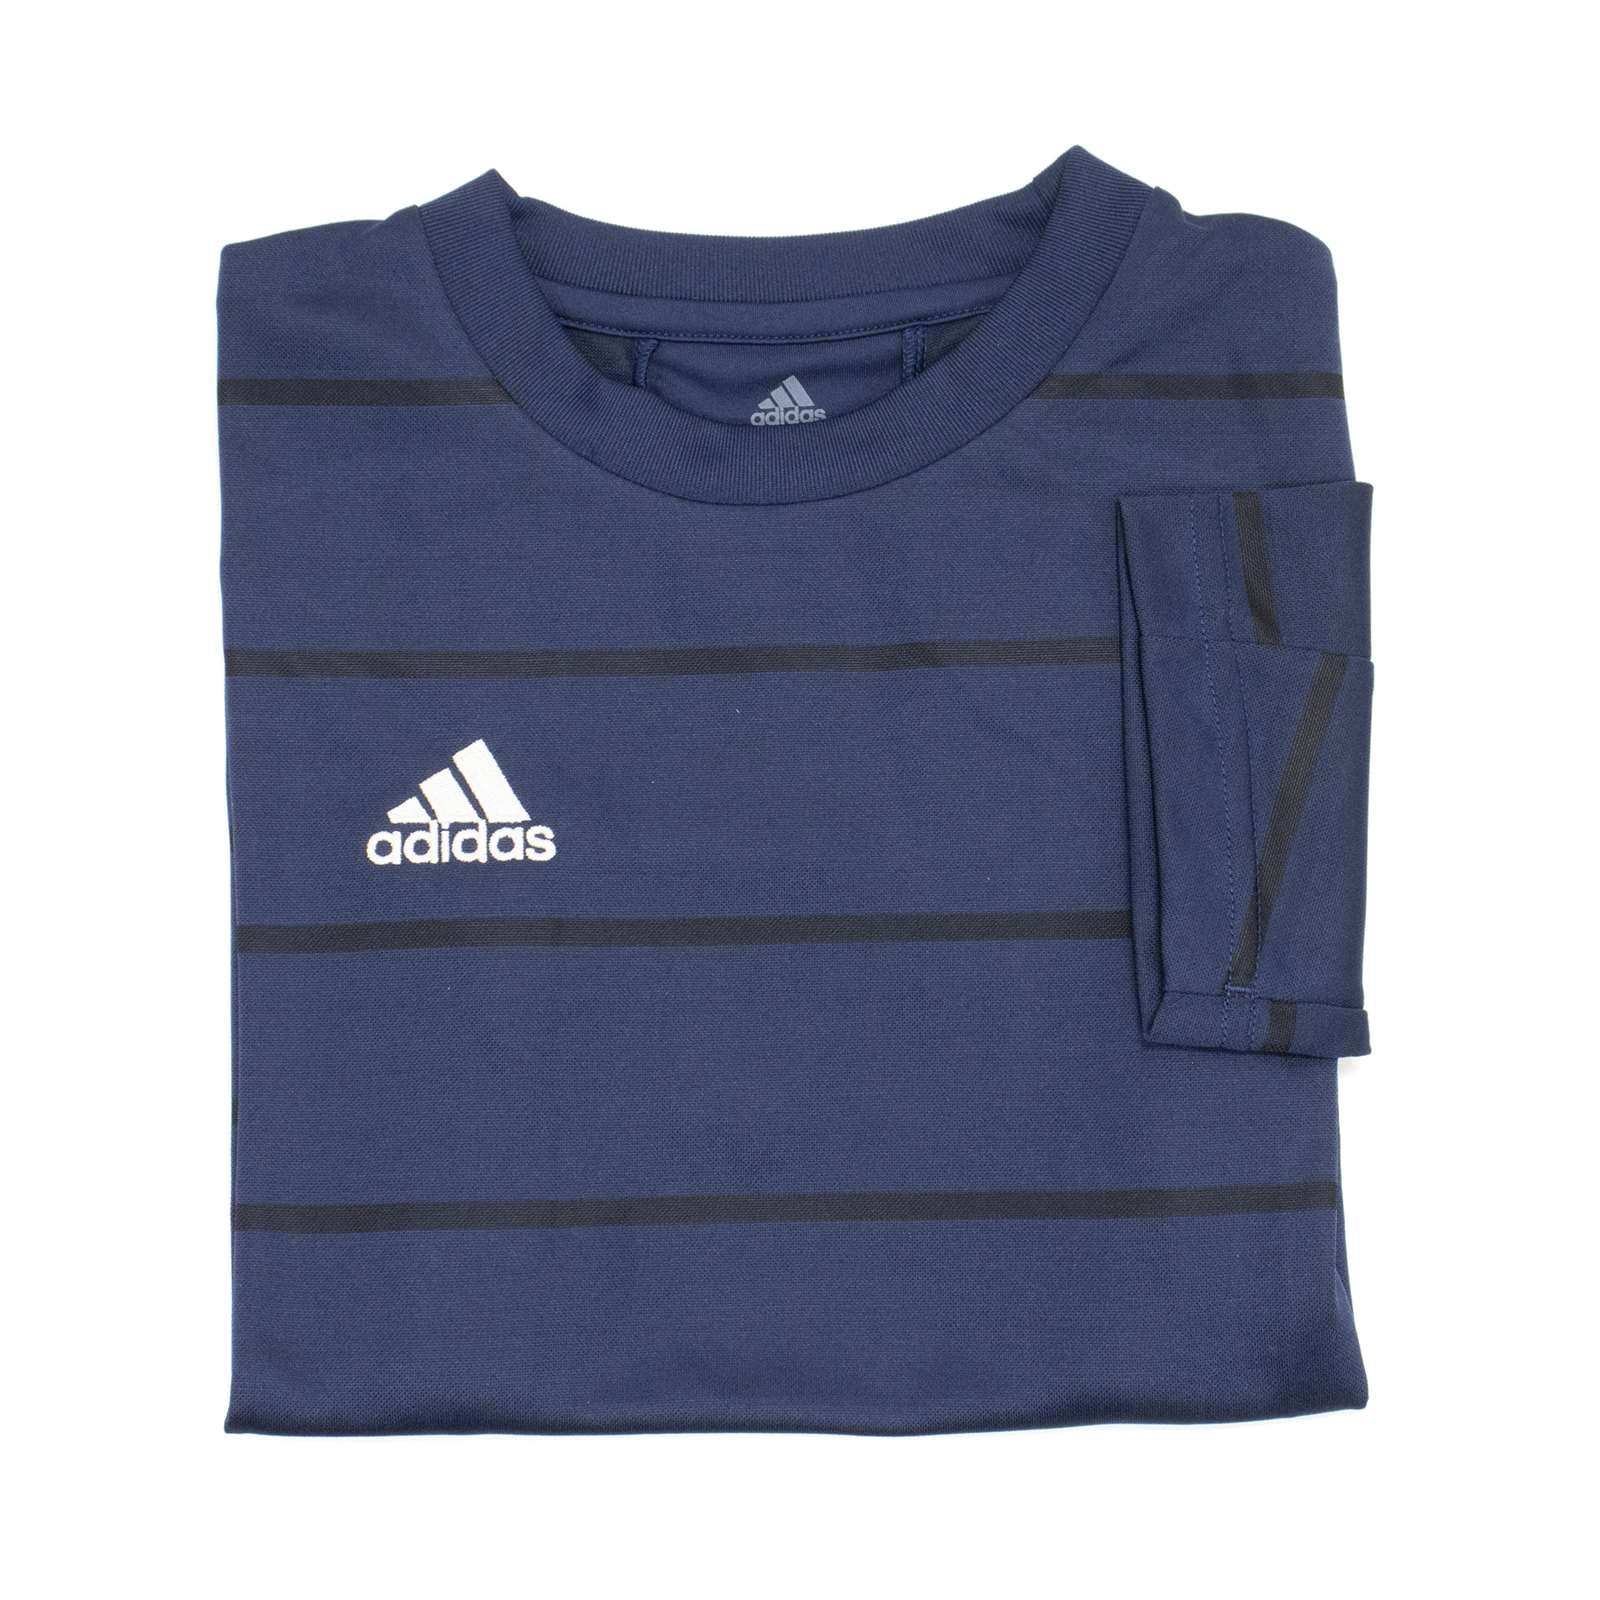 Adidas Boy Campeon 21 Youth Soccer Jersey